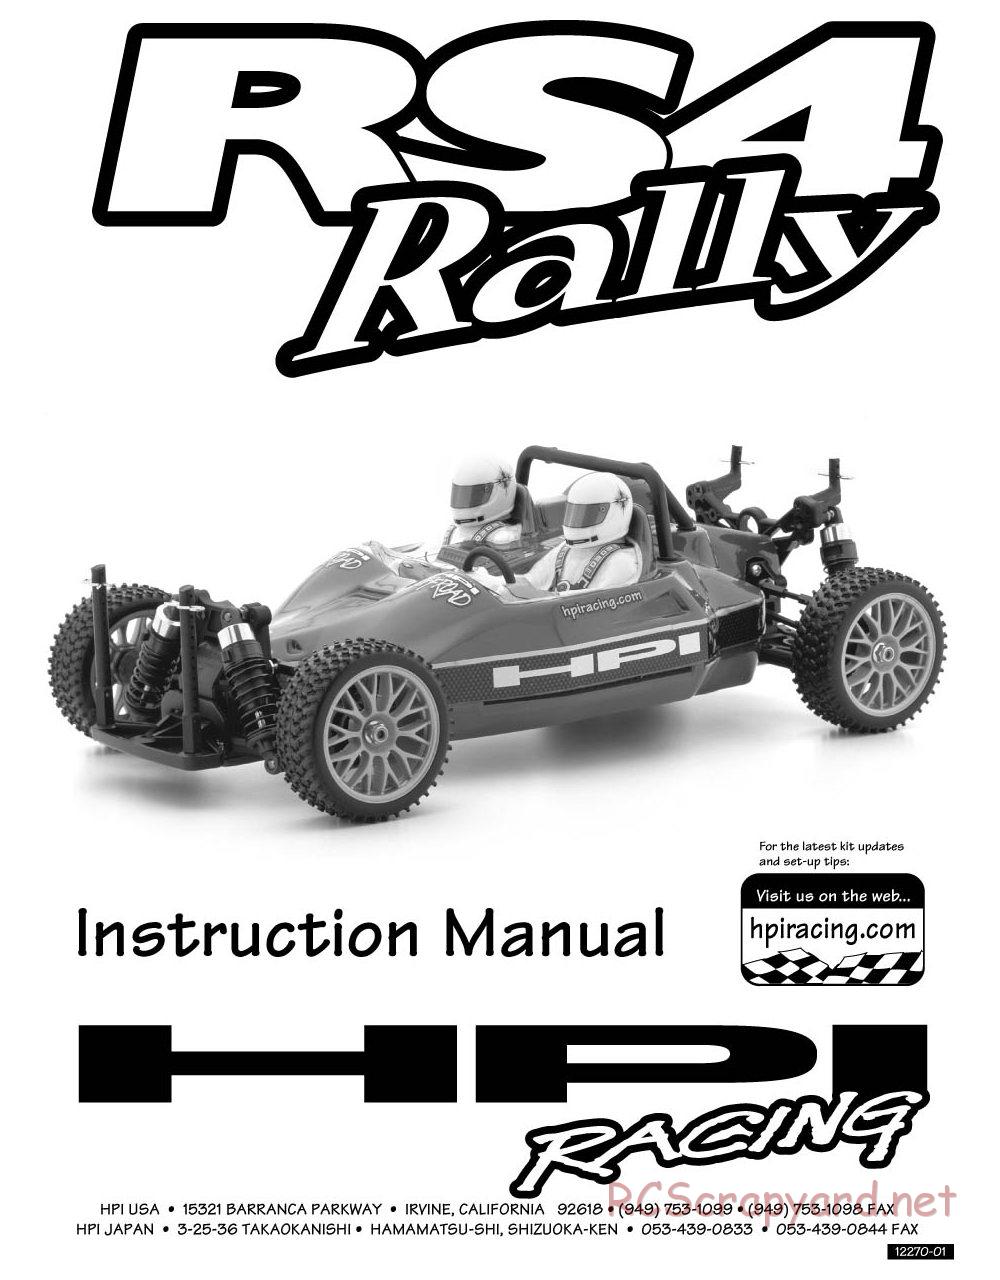 HPI - RS4 Rally - Manual - Page 1